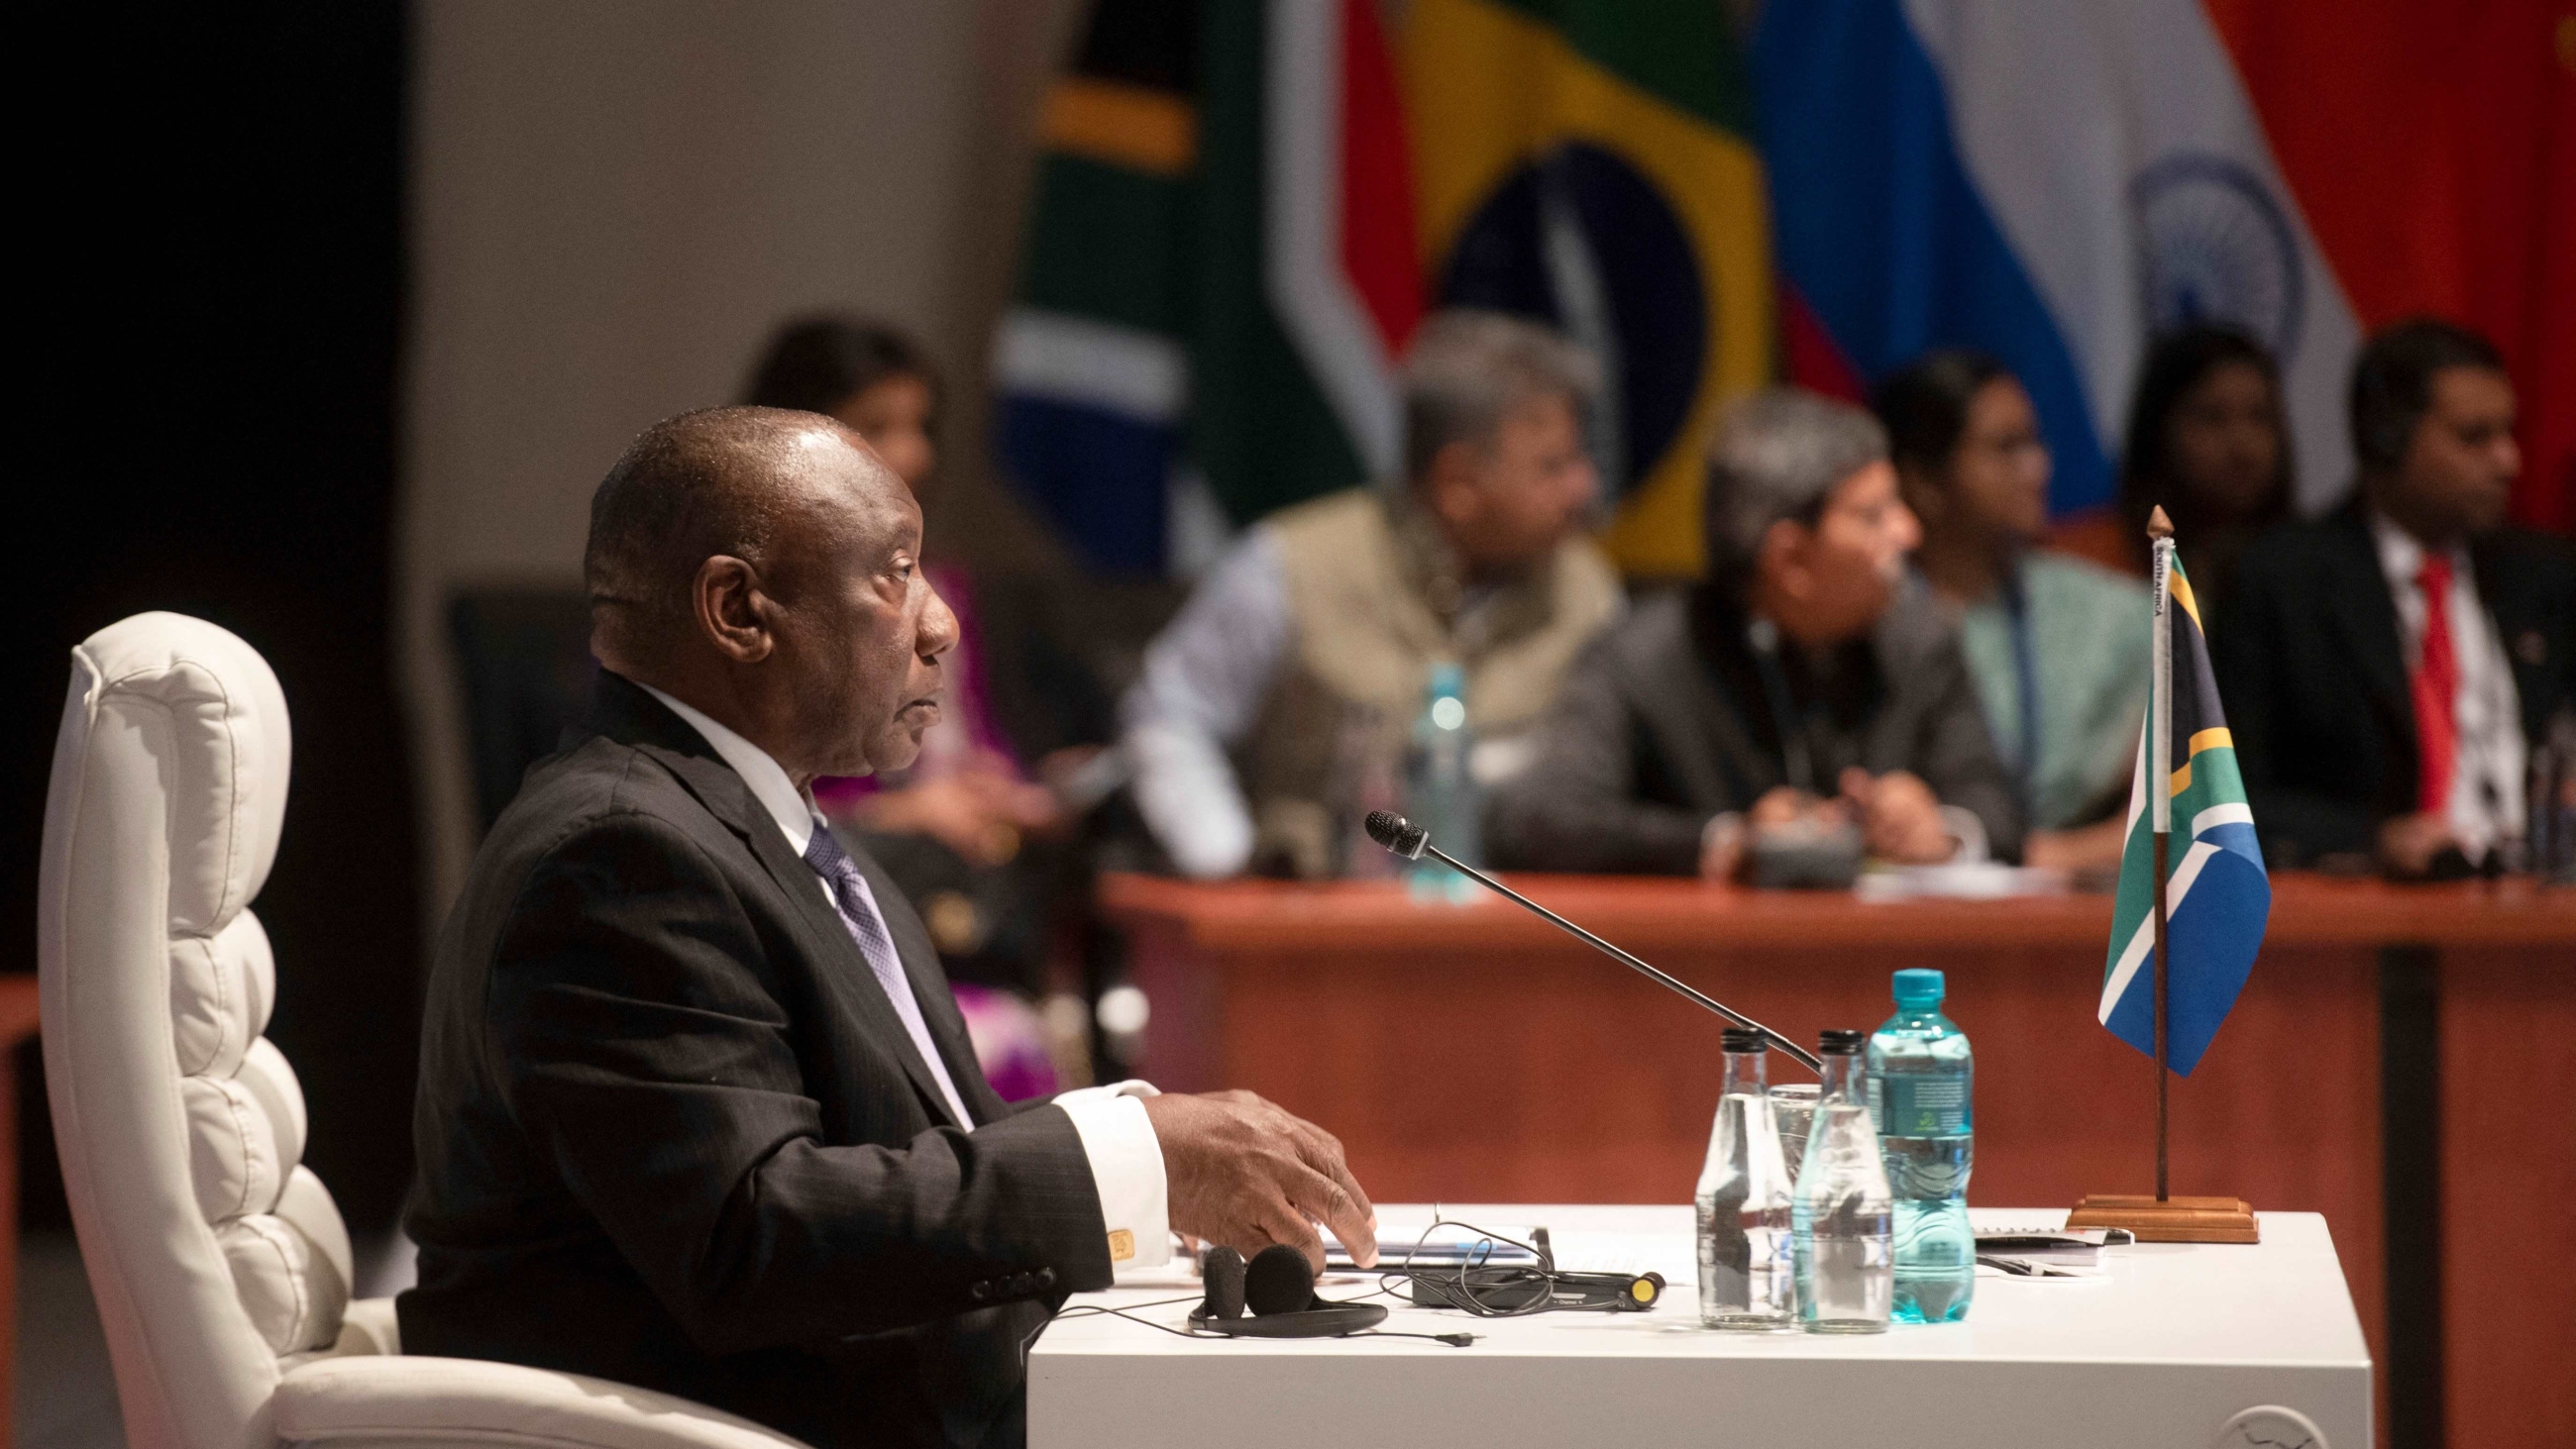 South Africa's Cyril Ramaphosa speaks at the BRICS summit in Johannesburg (AFP/Alet Pretorius)